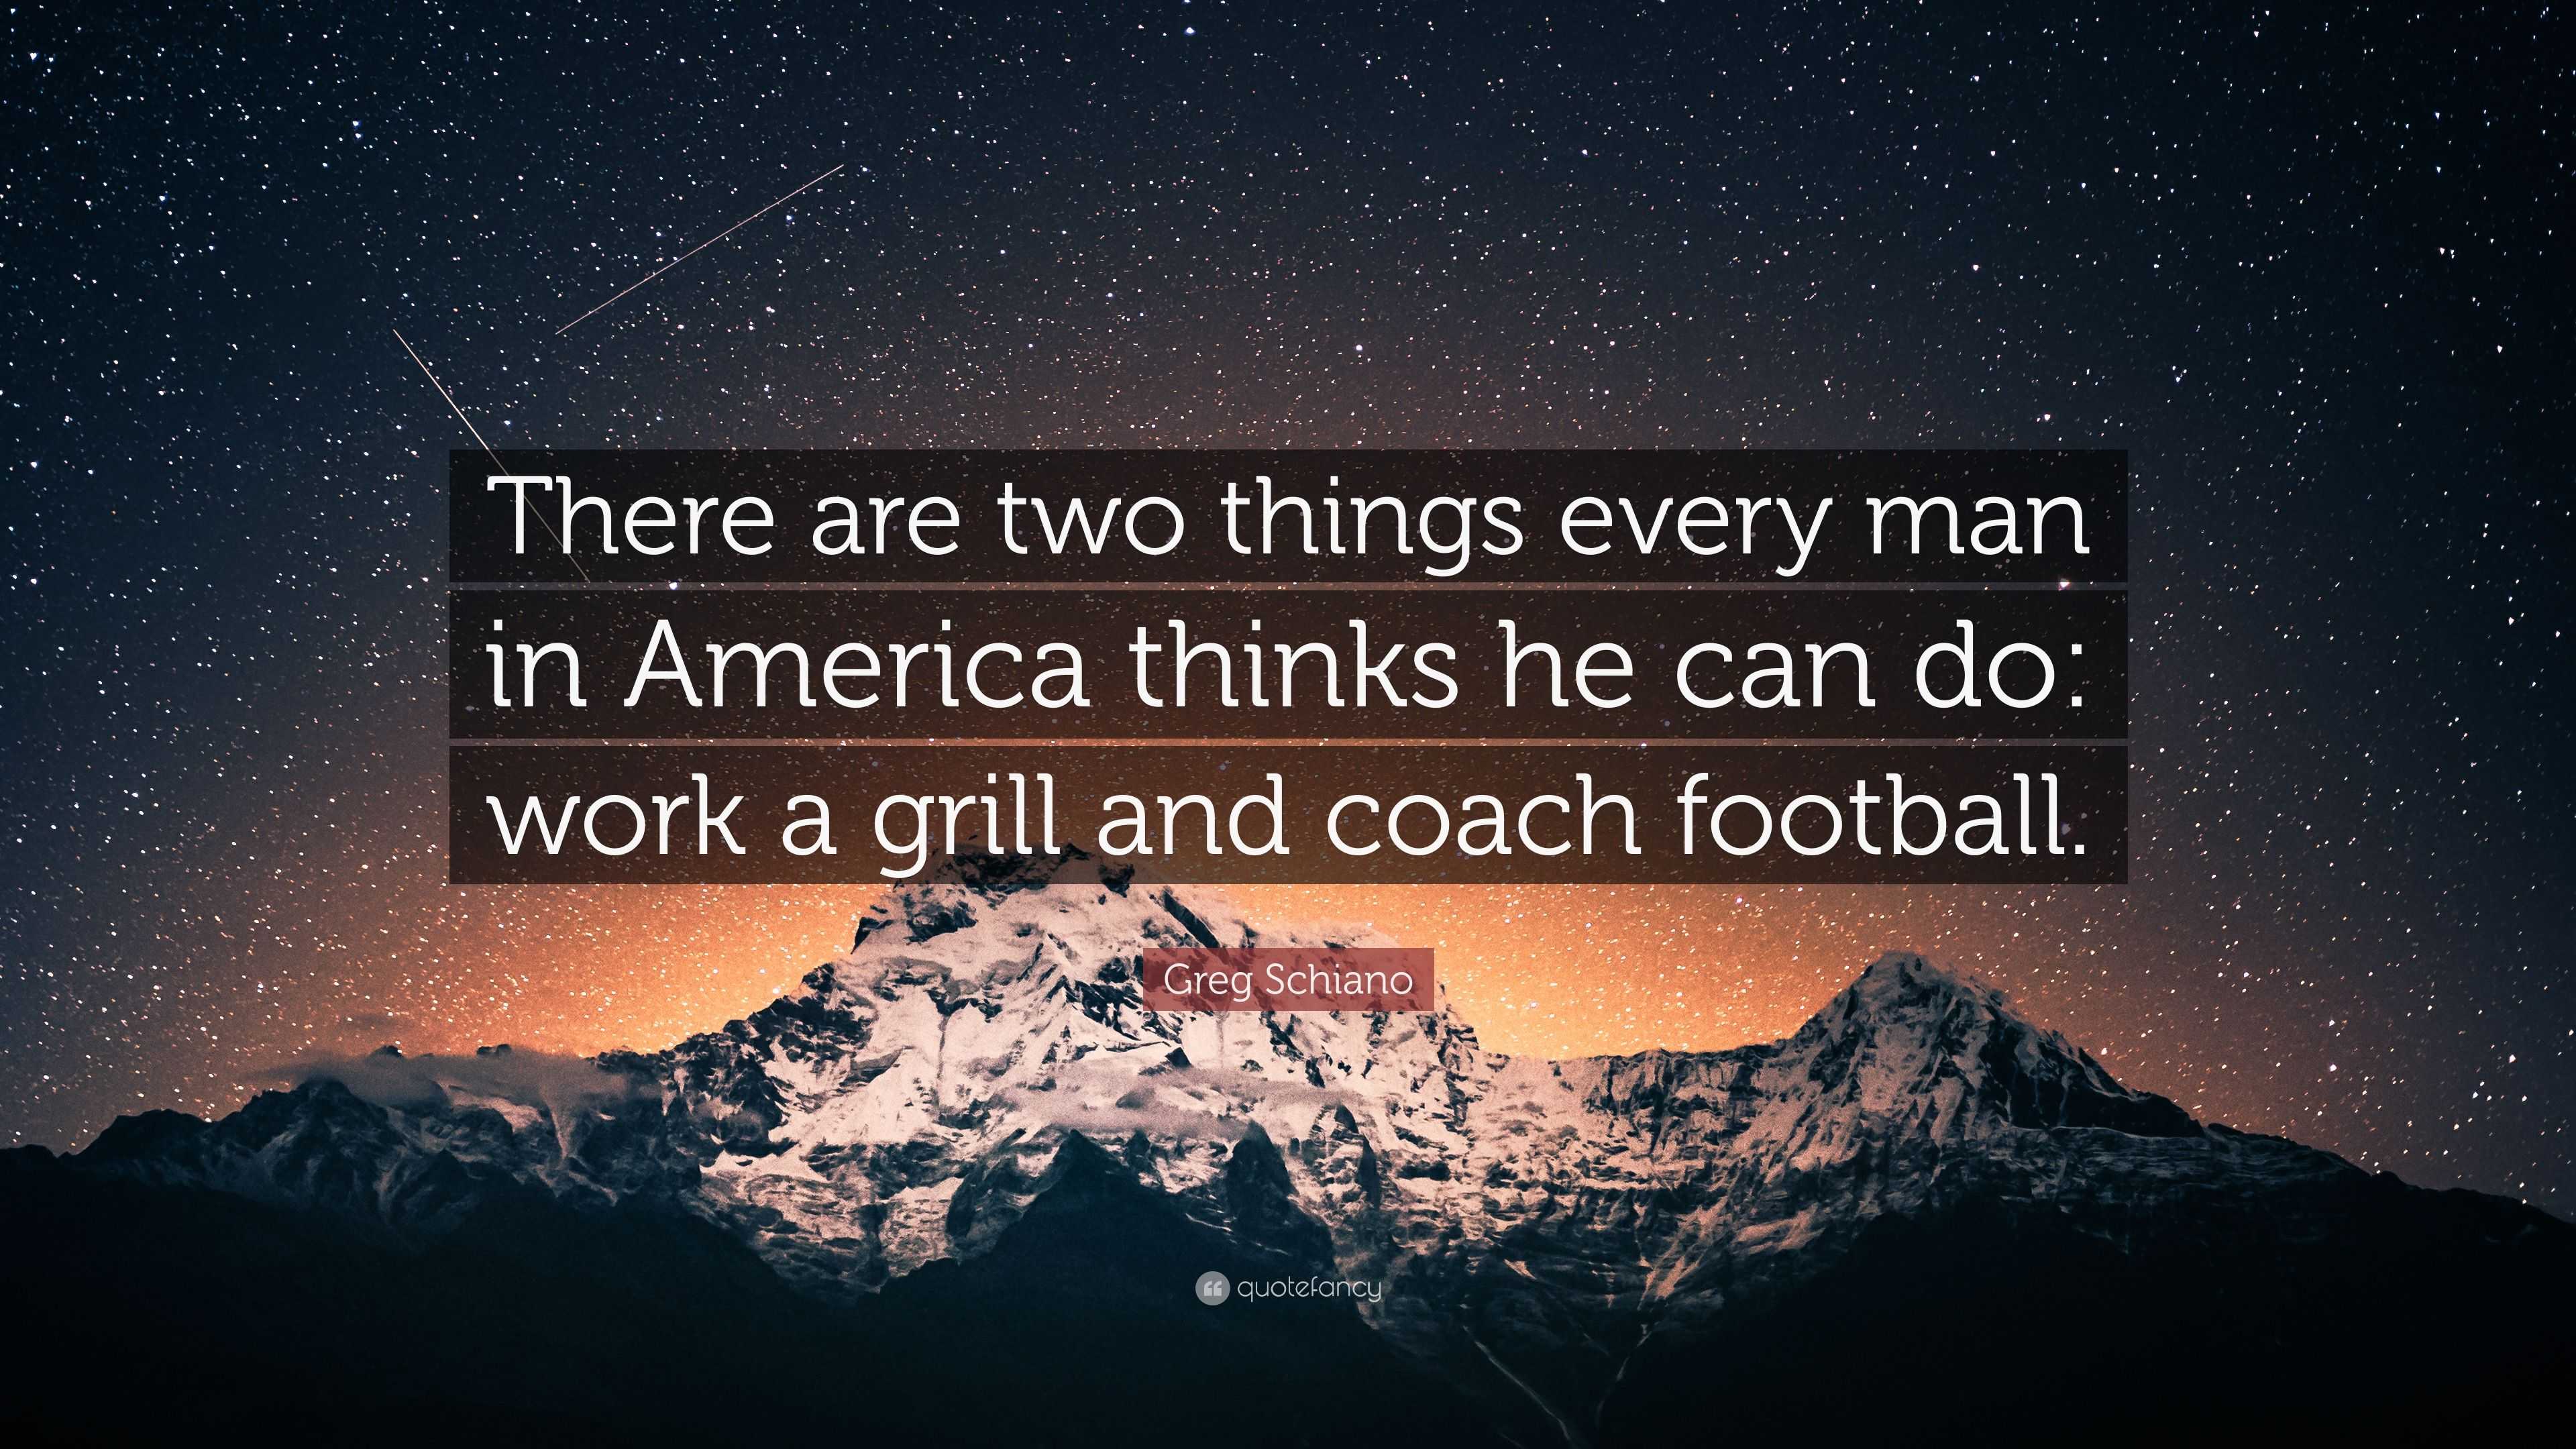 Greg Schiano Quote: “There are two things every man in America thinks ...